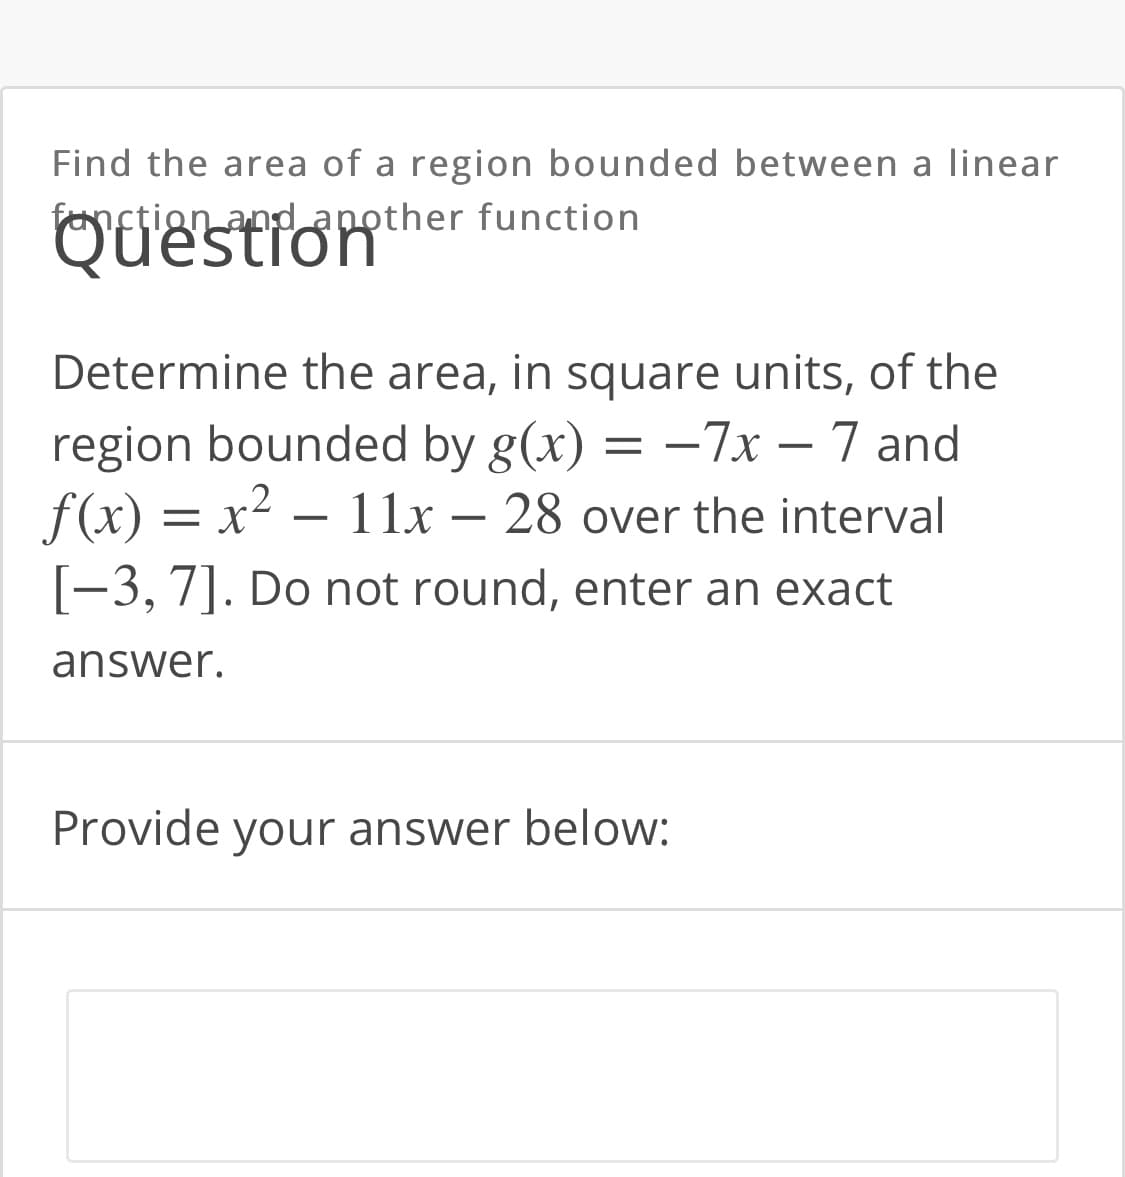 Find the area of a region bounded between a linear
fanction and another
function
Question"
Determine the area, in square units, of the
region bounded by g(x) = –7x – 7 and
f(x) = x² – 11x – 28 over the interval
[-3, 7]. Do not round, enter an exact
answer.
Provide your answer below:
